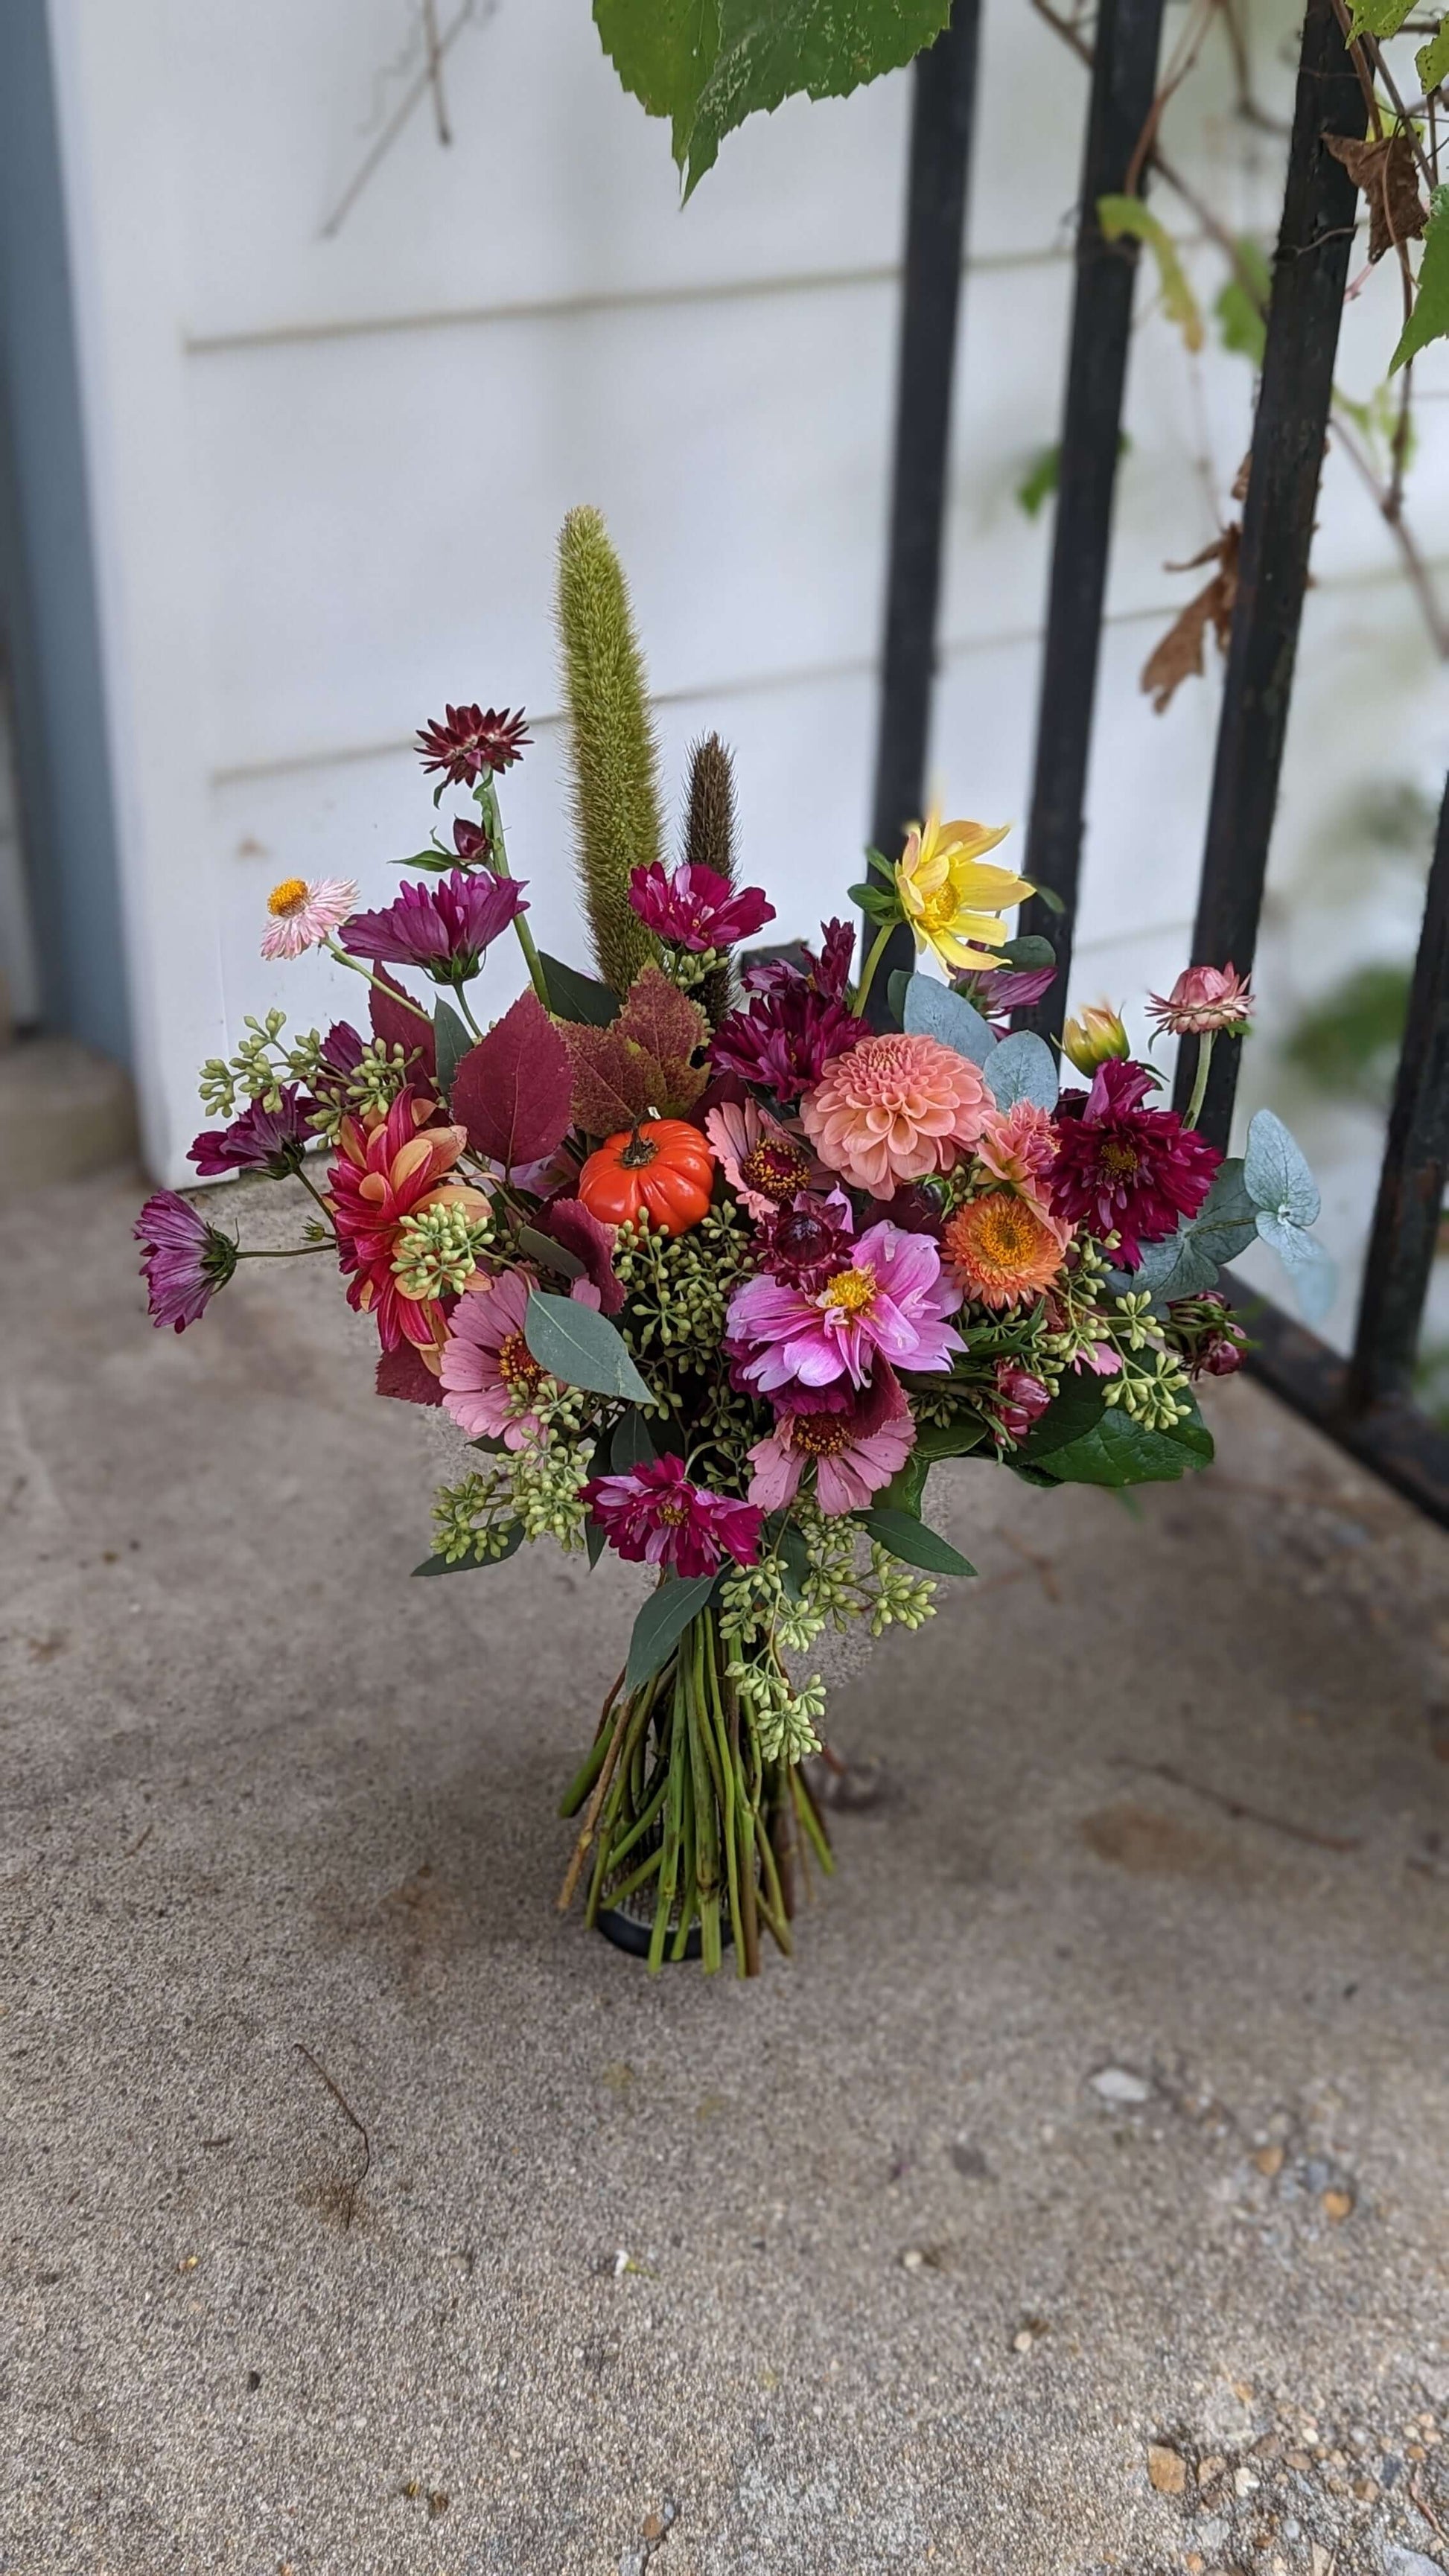 Hand-tied Bouquet
For those that already have a collection of vases and don't want any more! All you need to do is cut the stems and place in water!Please include flower and color preferences. Some colors or flowers may not be available for same day orders.
Flower arrangement
FloralsbyHeidiCatherine